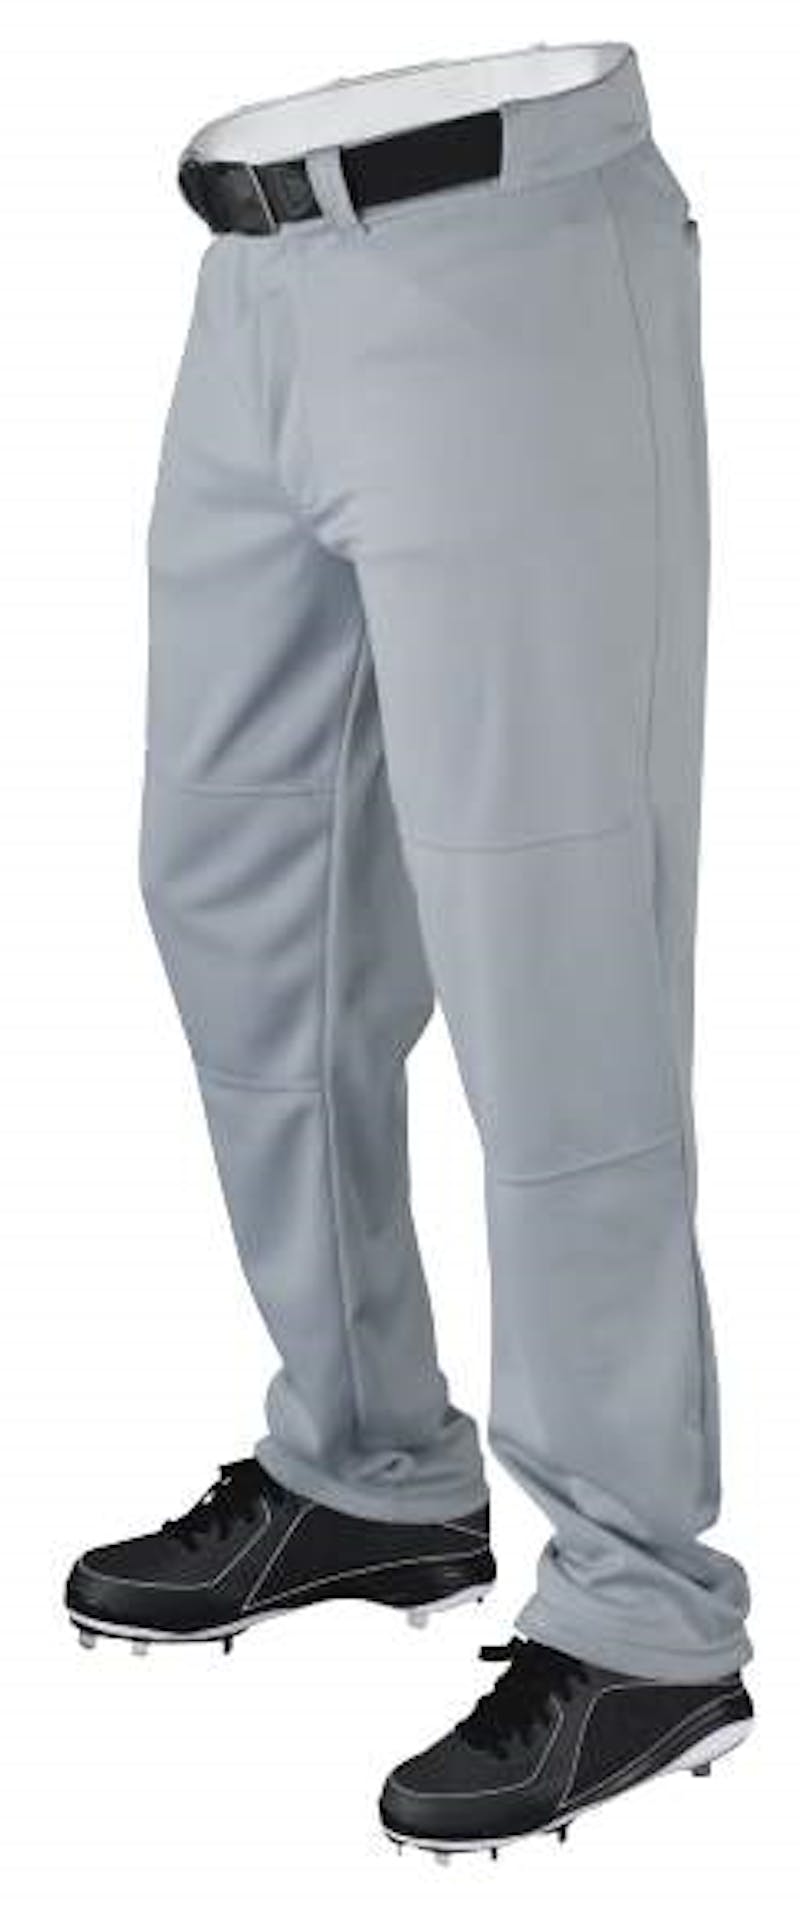 Wilson Youth Baseball Pants Grey Small Wta4228 for sale online 